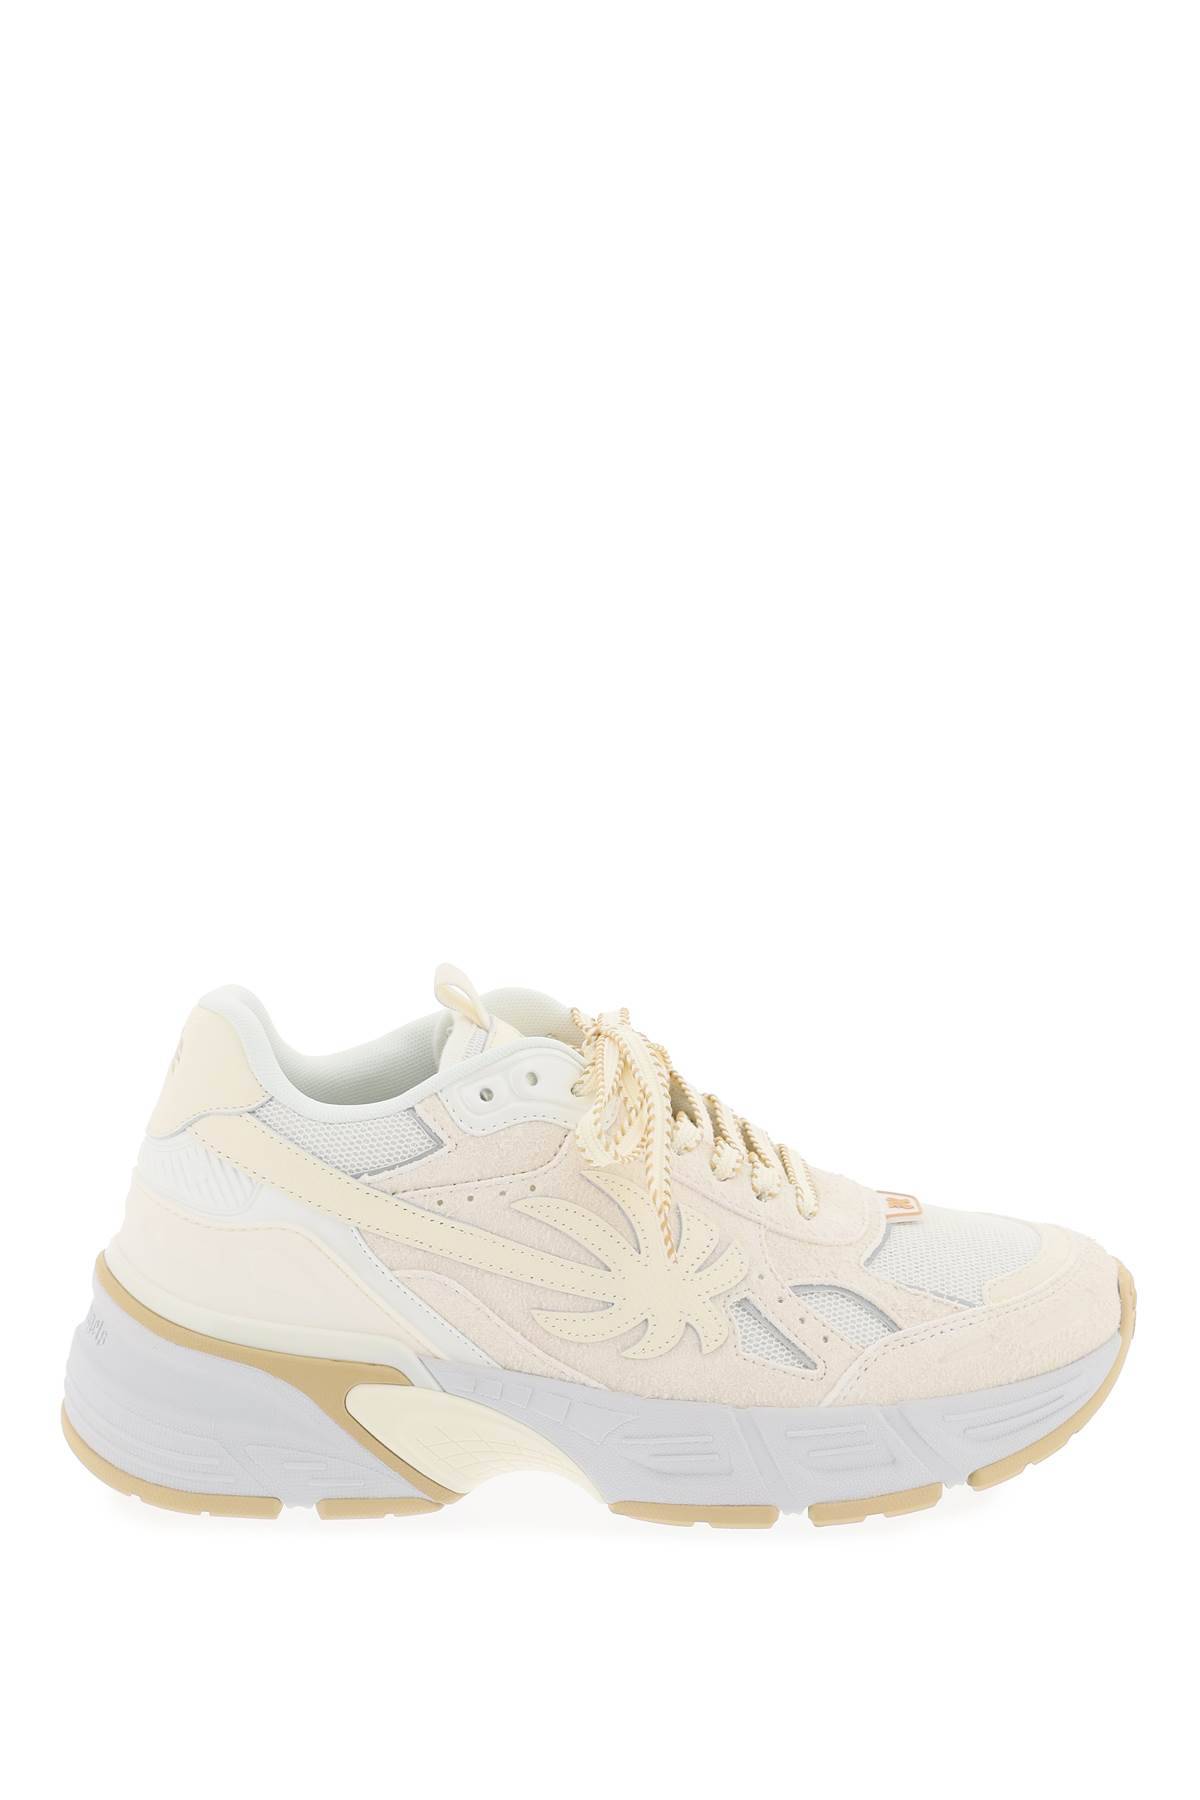 Shop Palm Angels Palm Runner Sneakers For In Beige,white